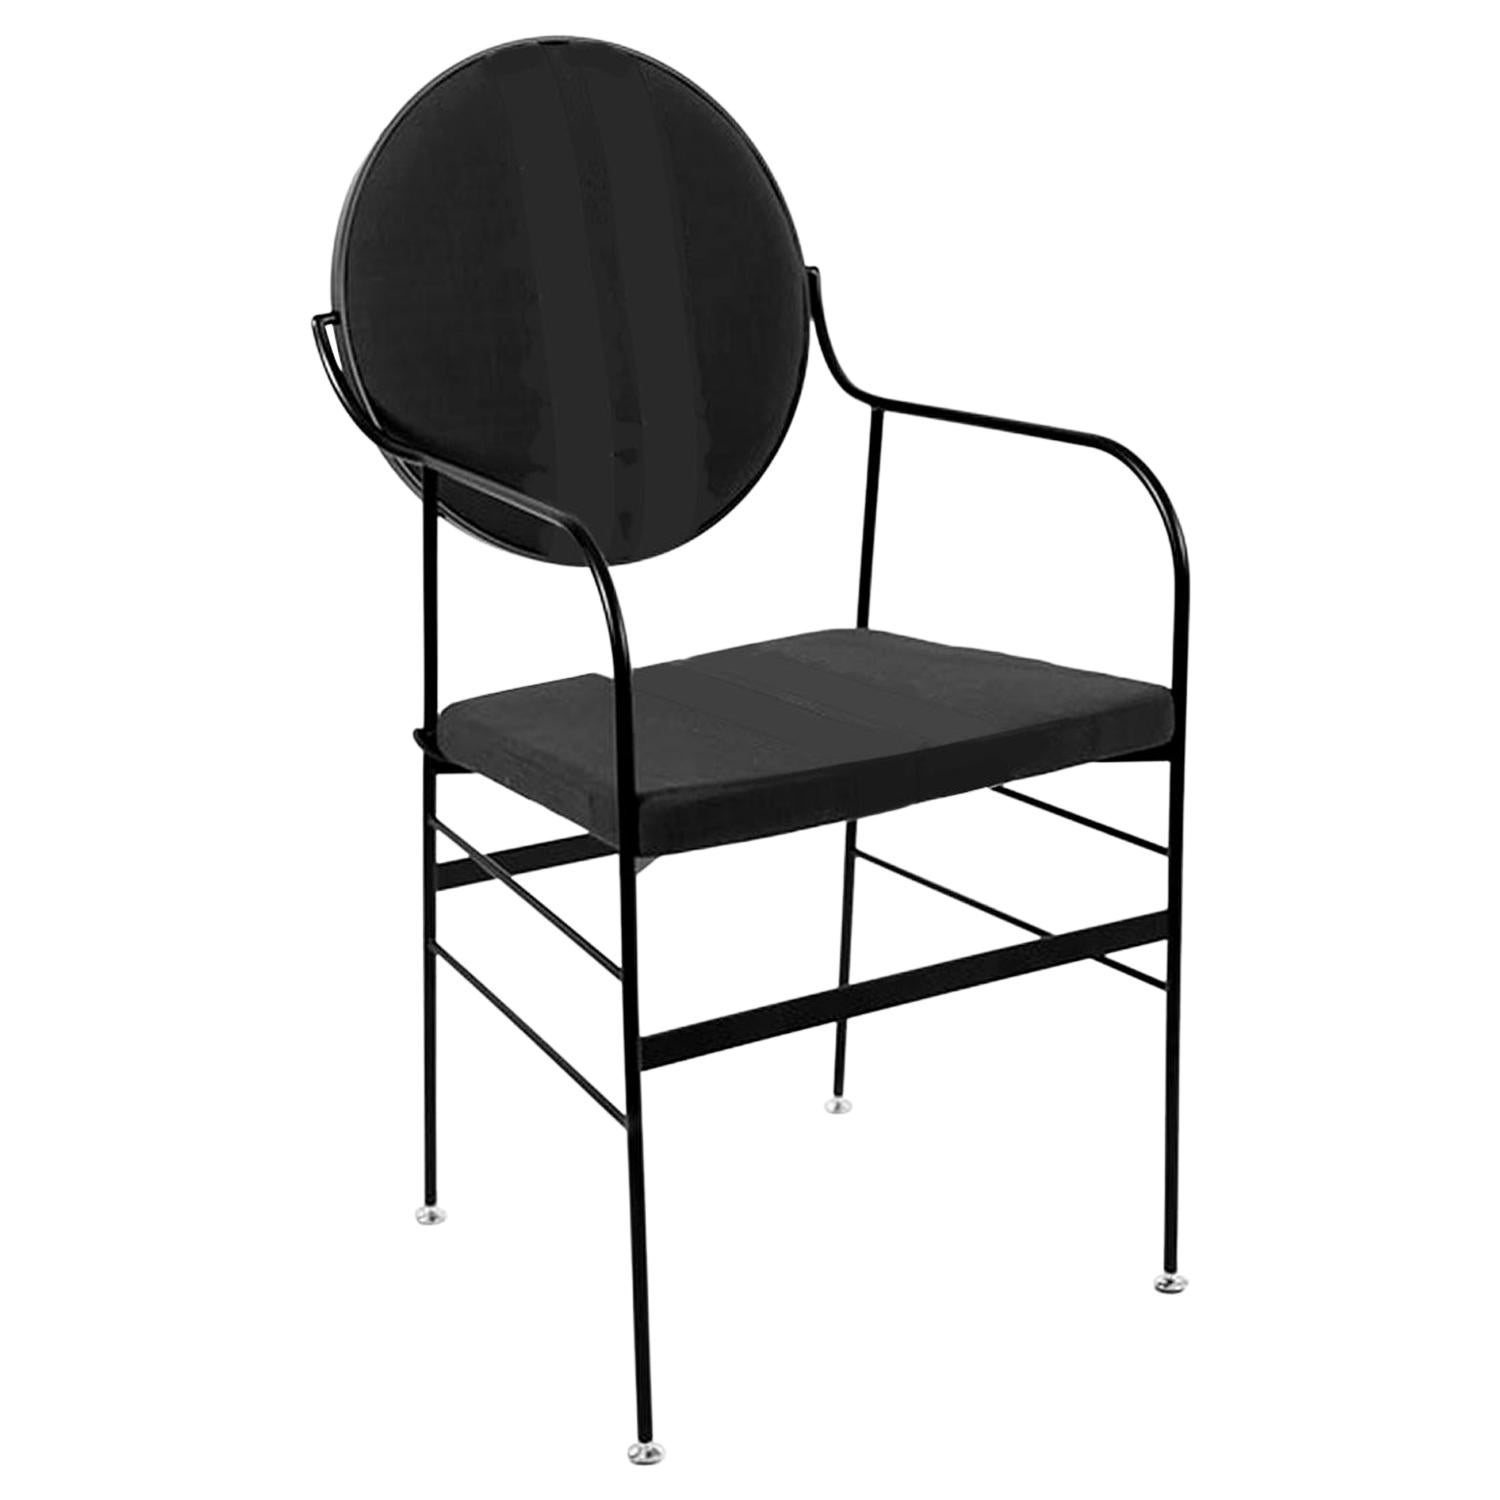 In Stock in Los Angeles, Velvet Dining Chair Black, by Paolo Calcagni